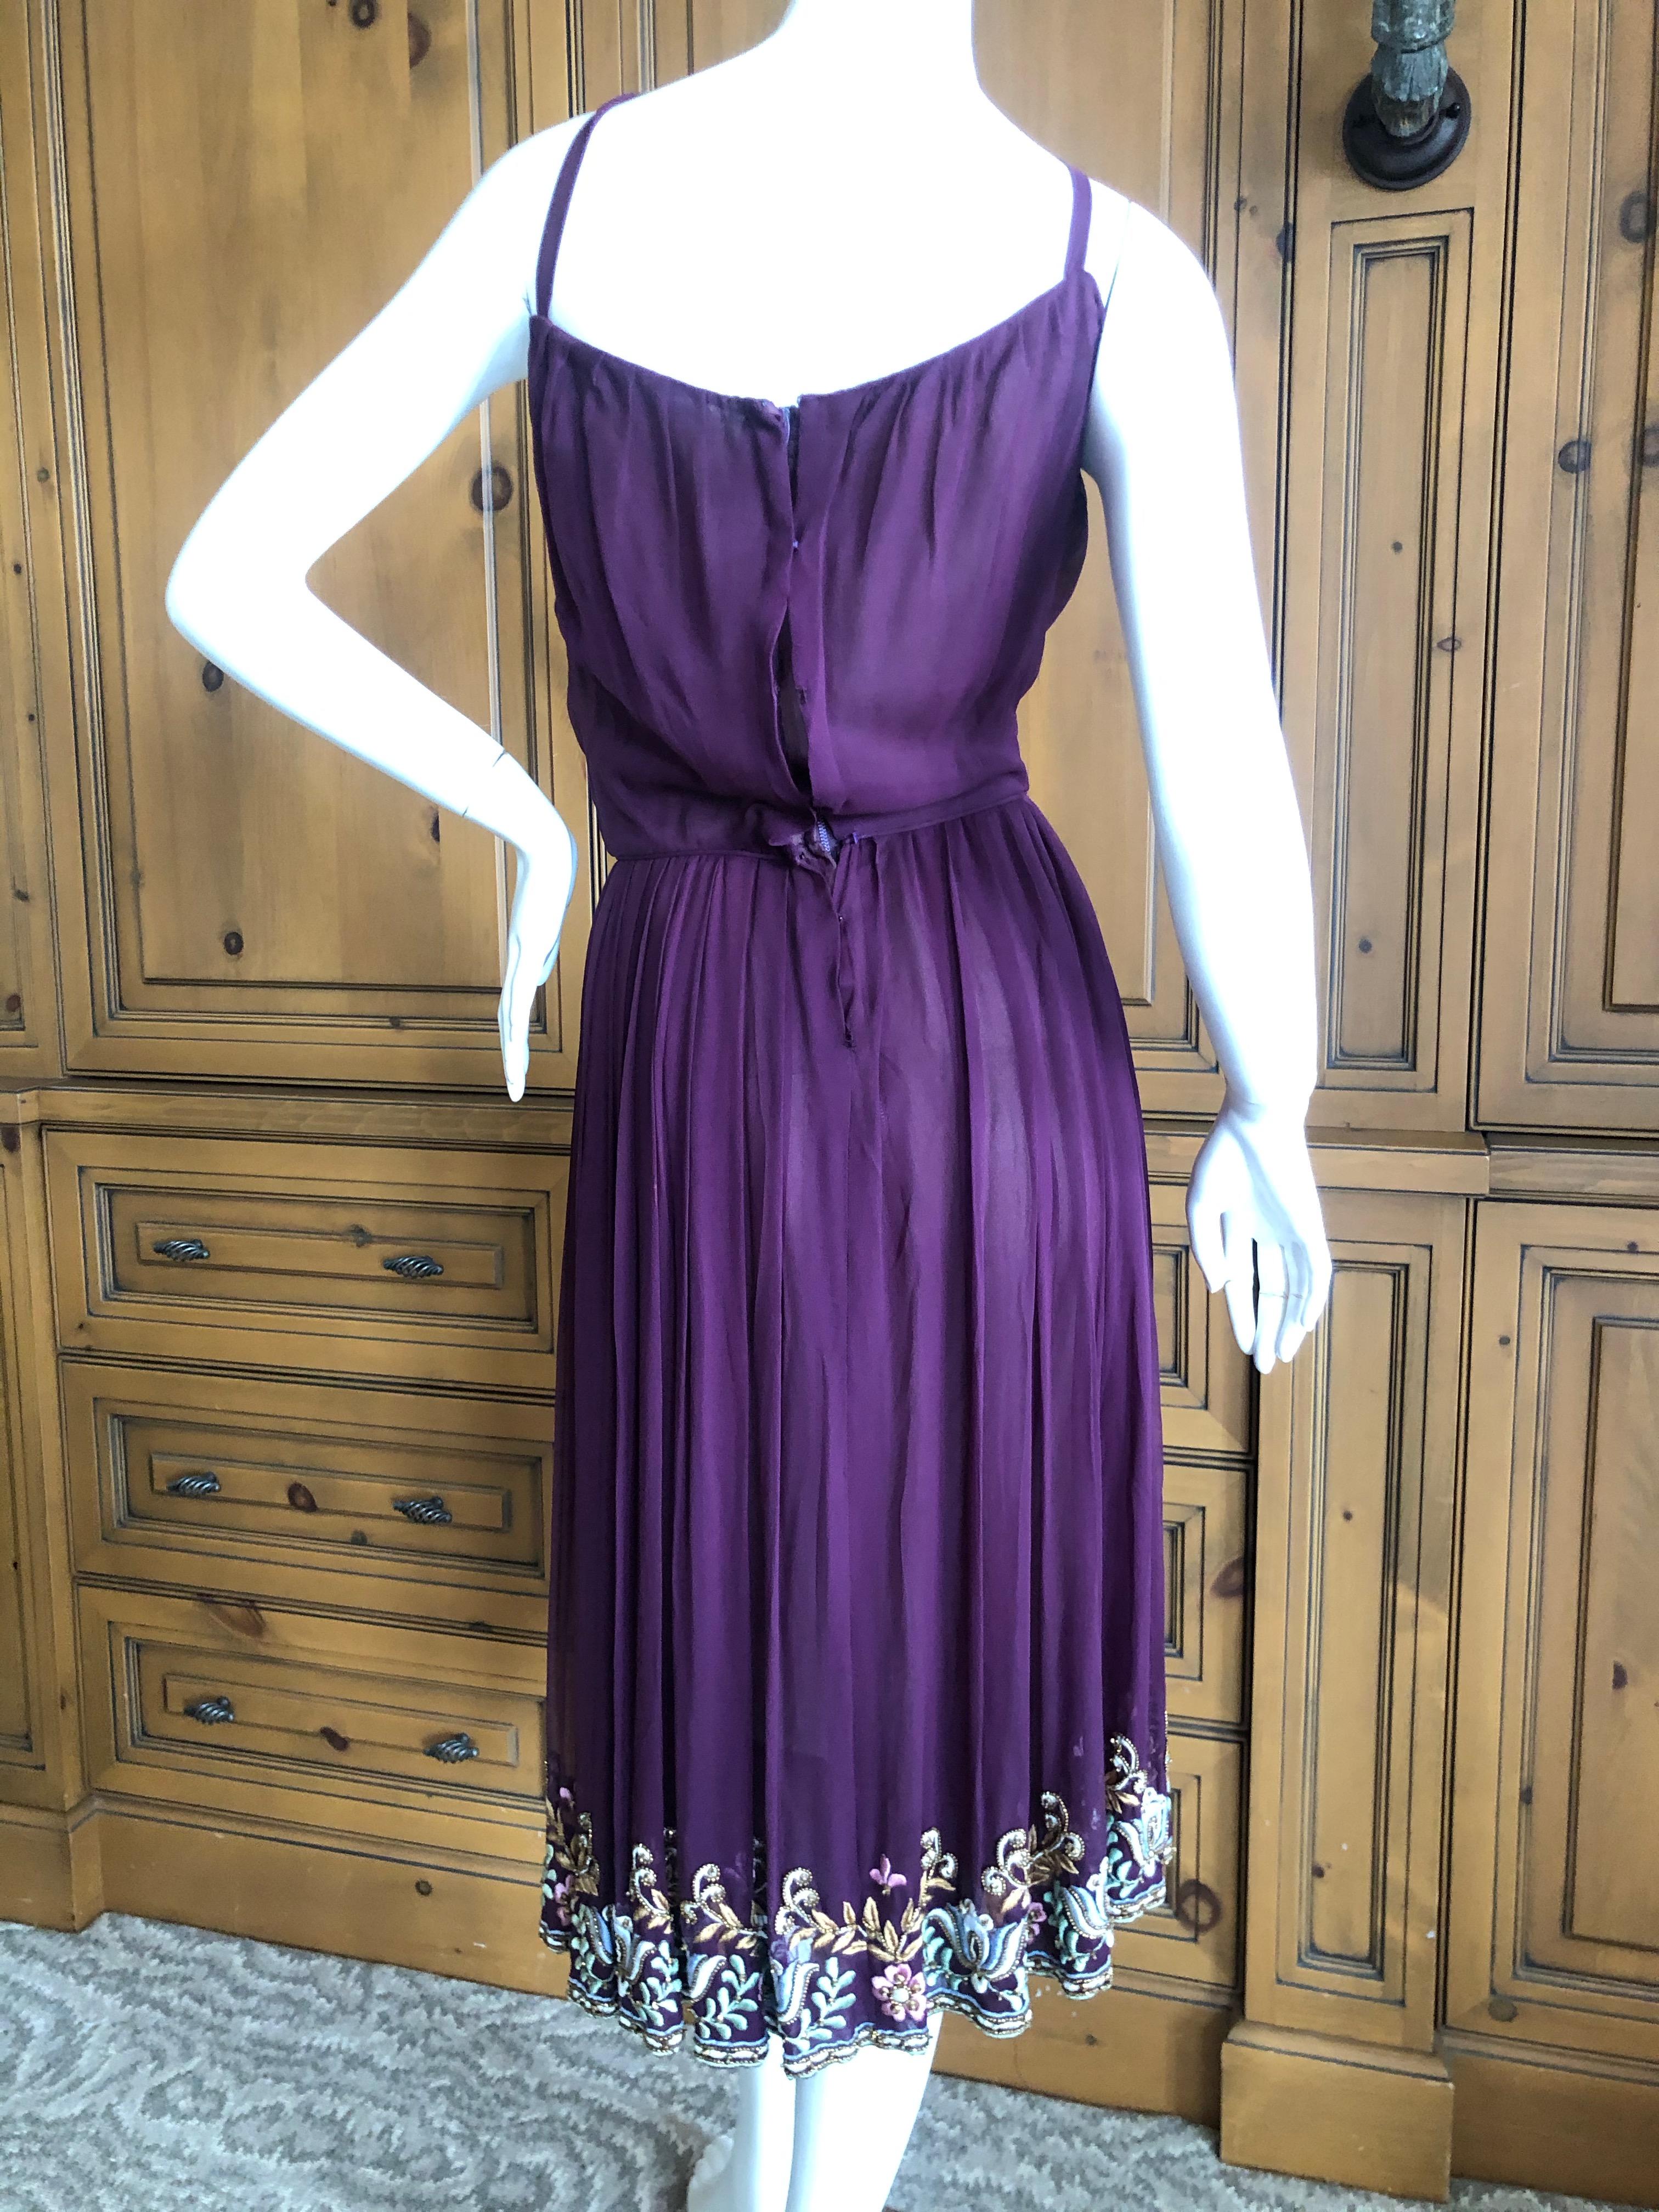 Christian Dior London 1960's Numbered Haute Couture Dress w Lesage Embellishment For Sale 2